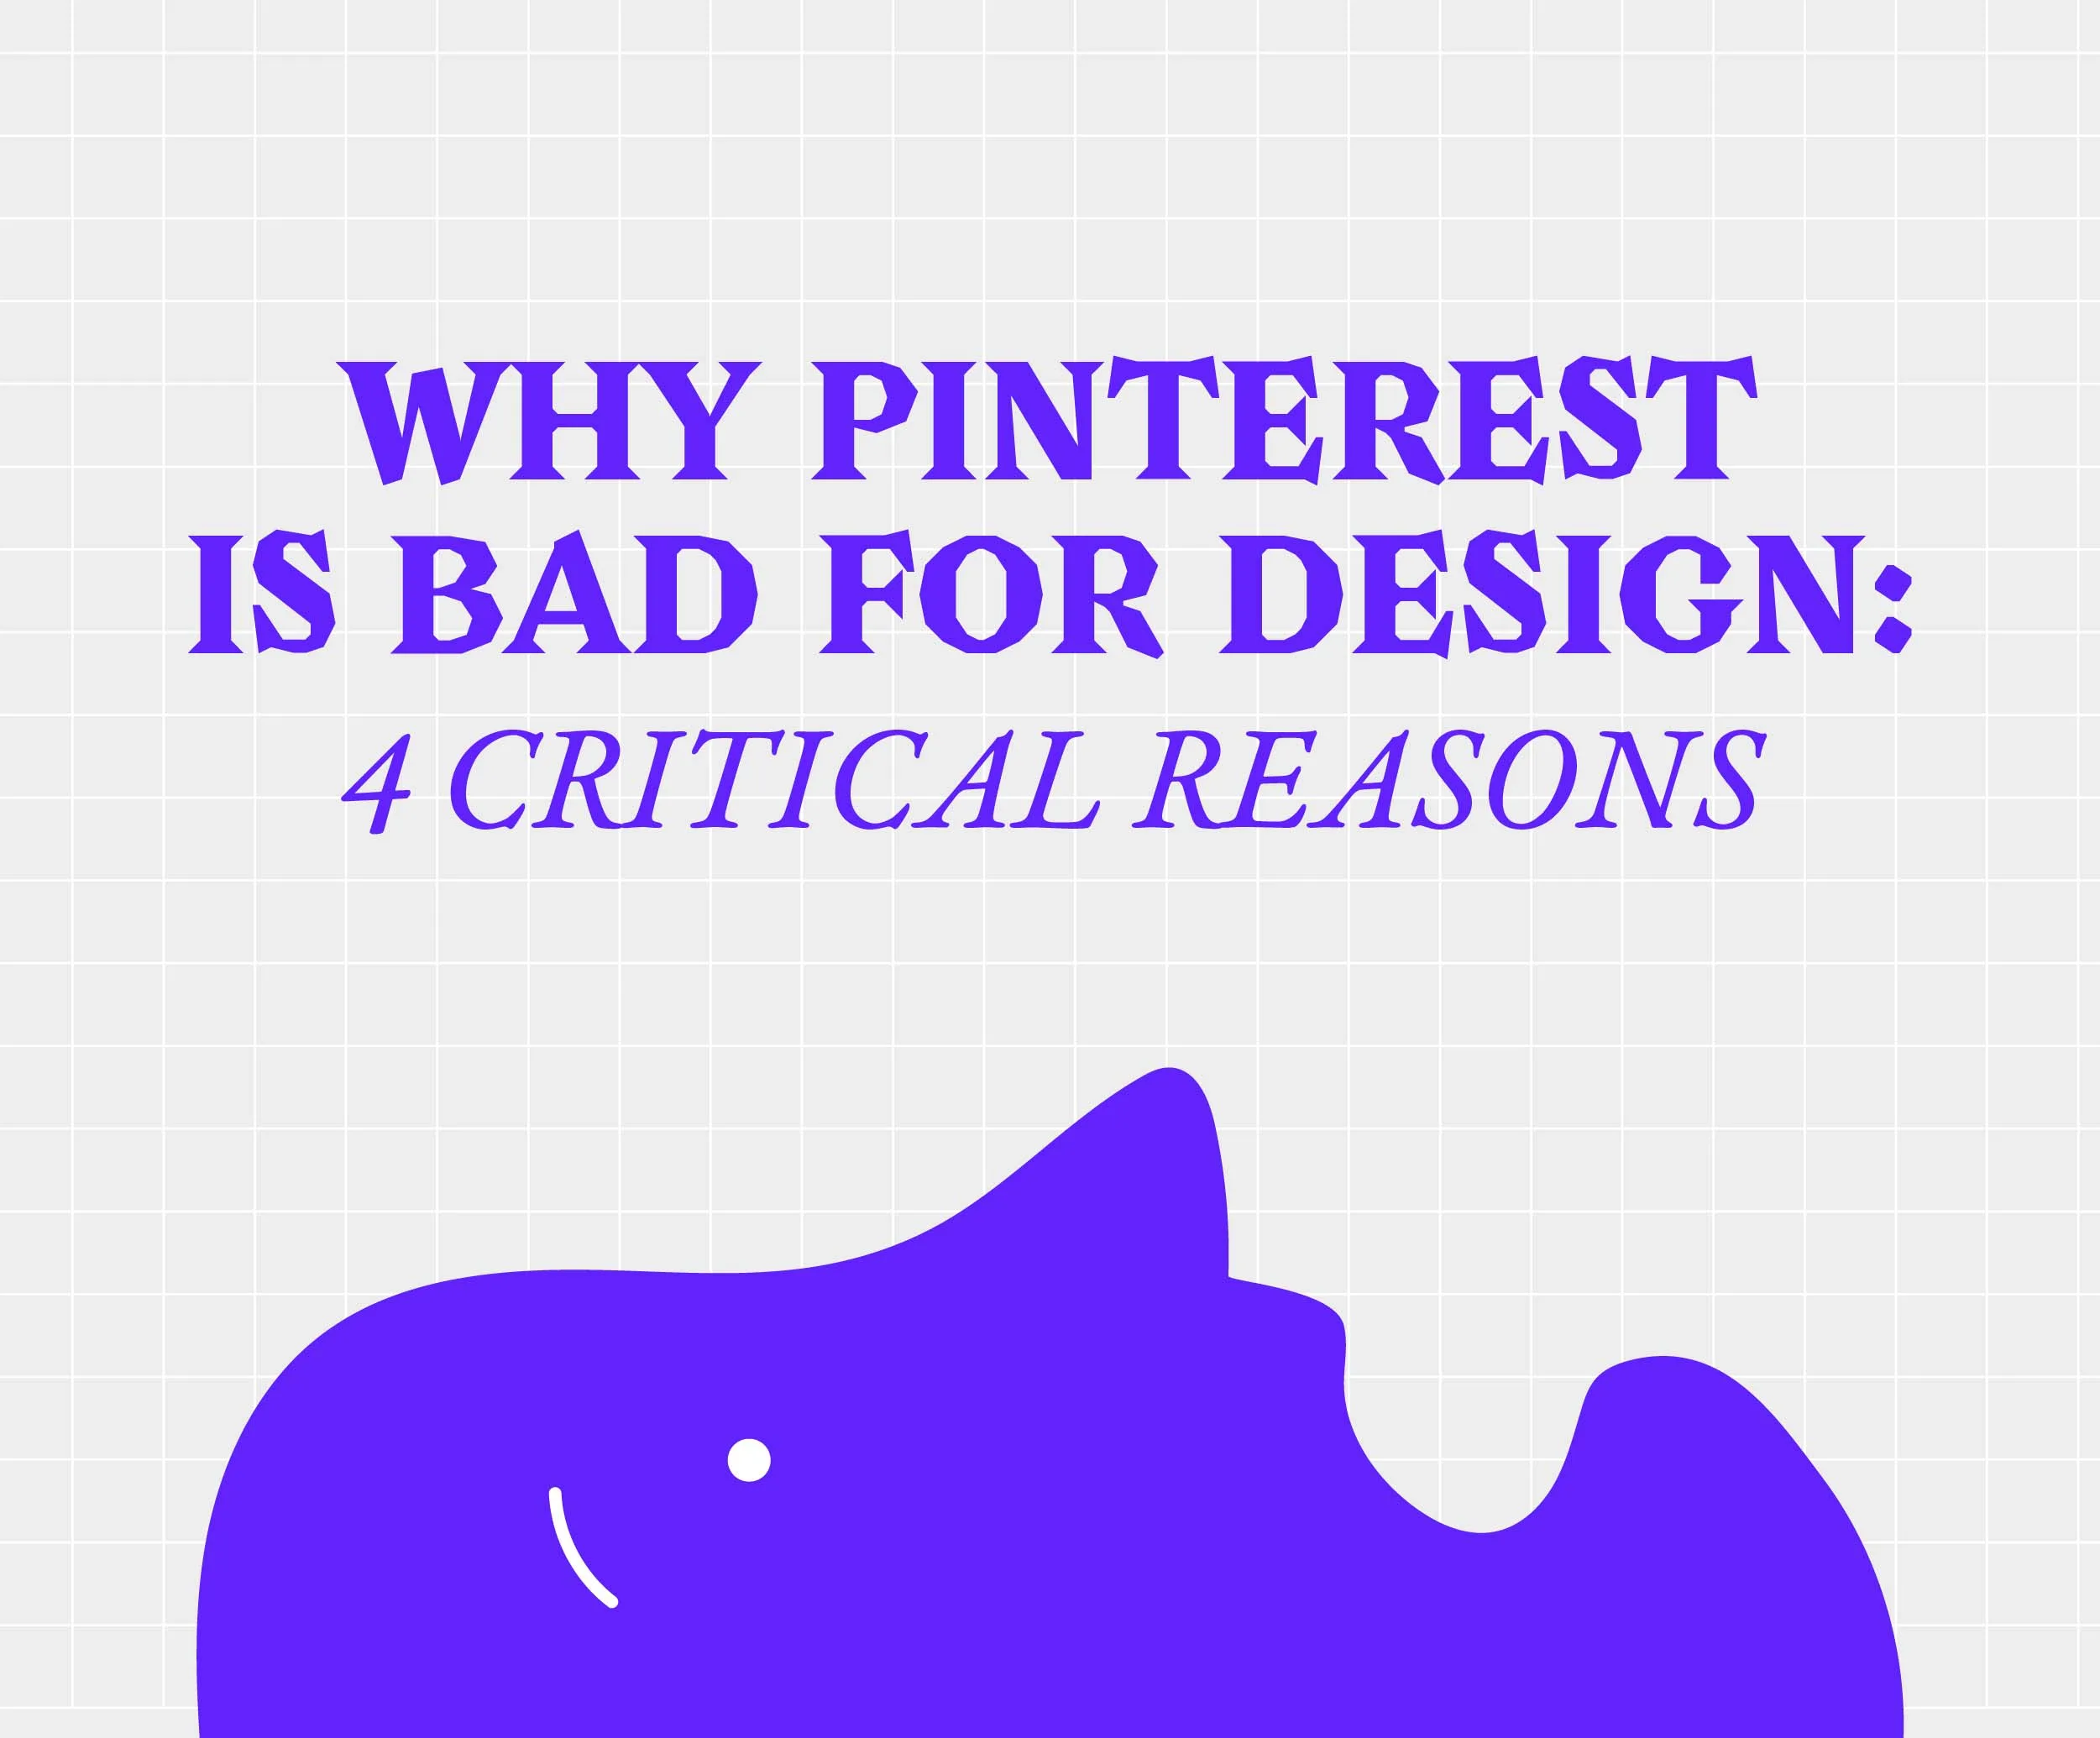 Stop using Pinterest as a Graphic Designer, Creative Resources for Design Projects